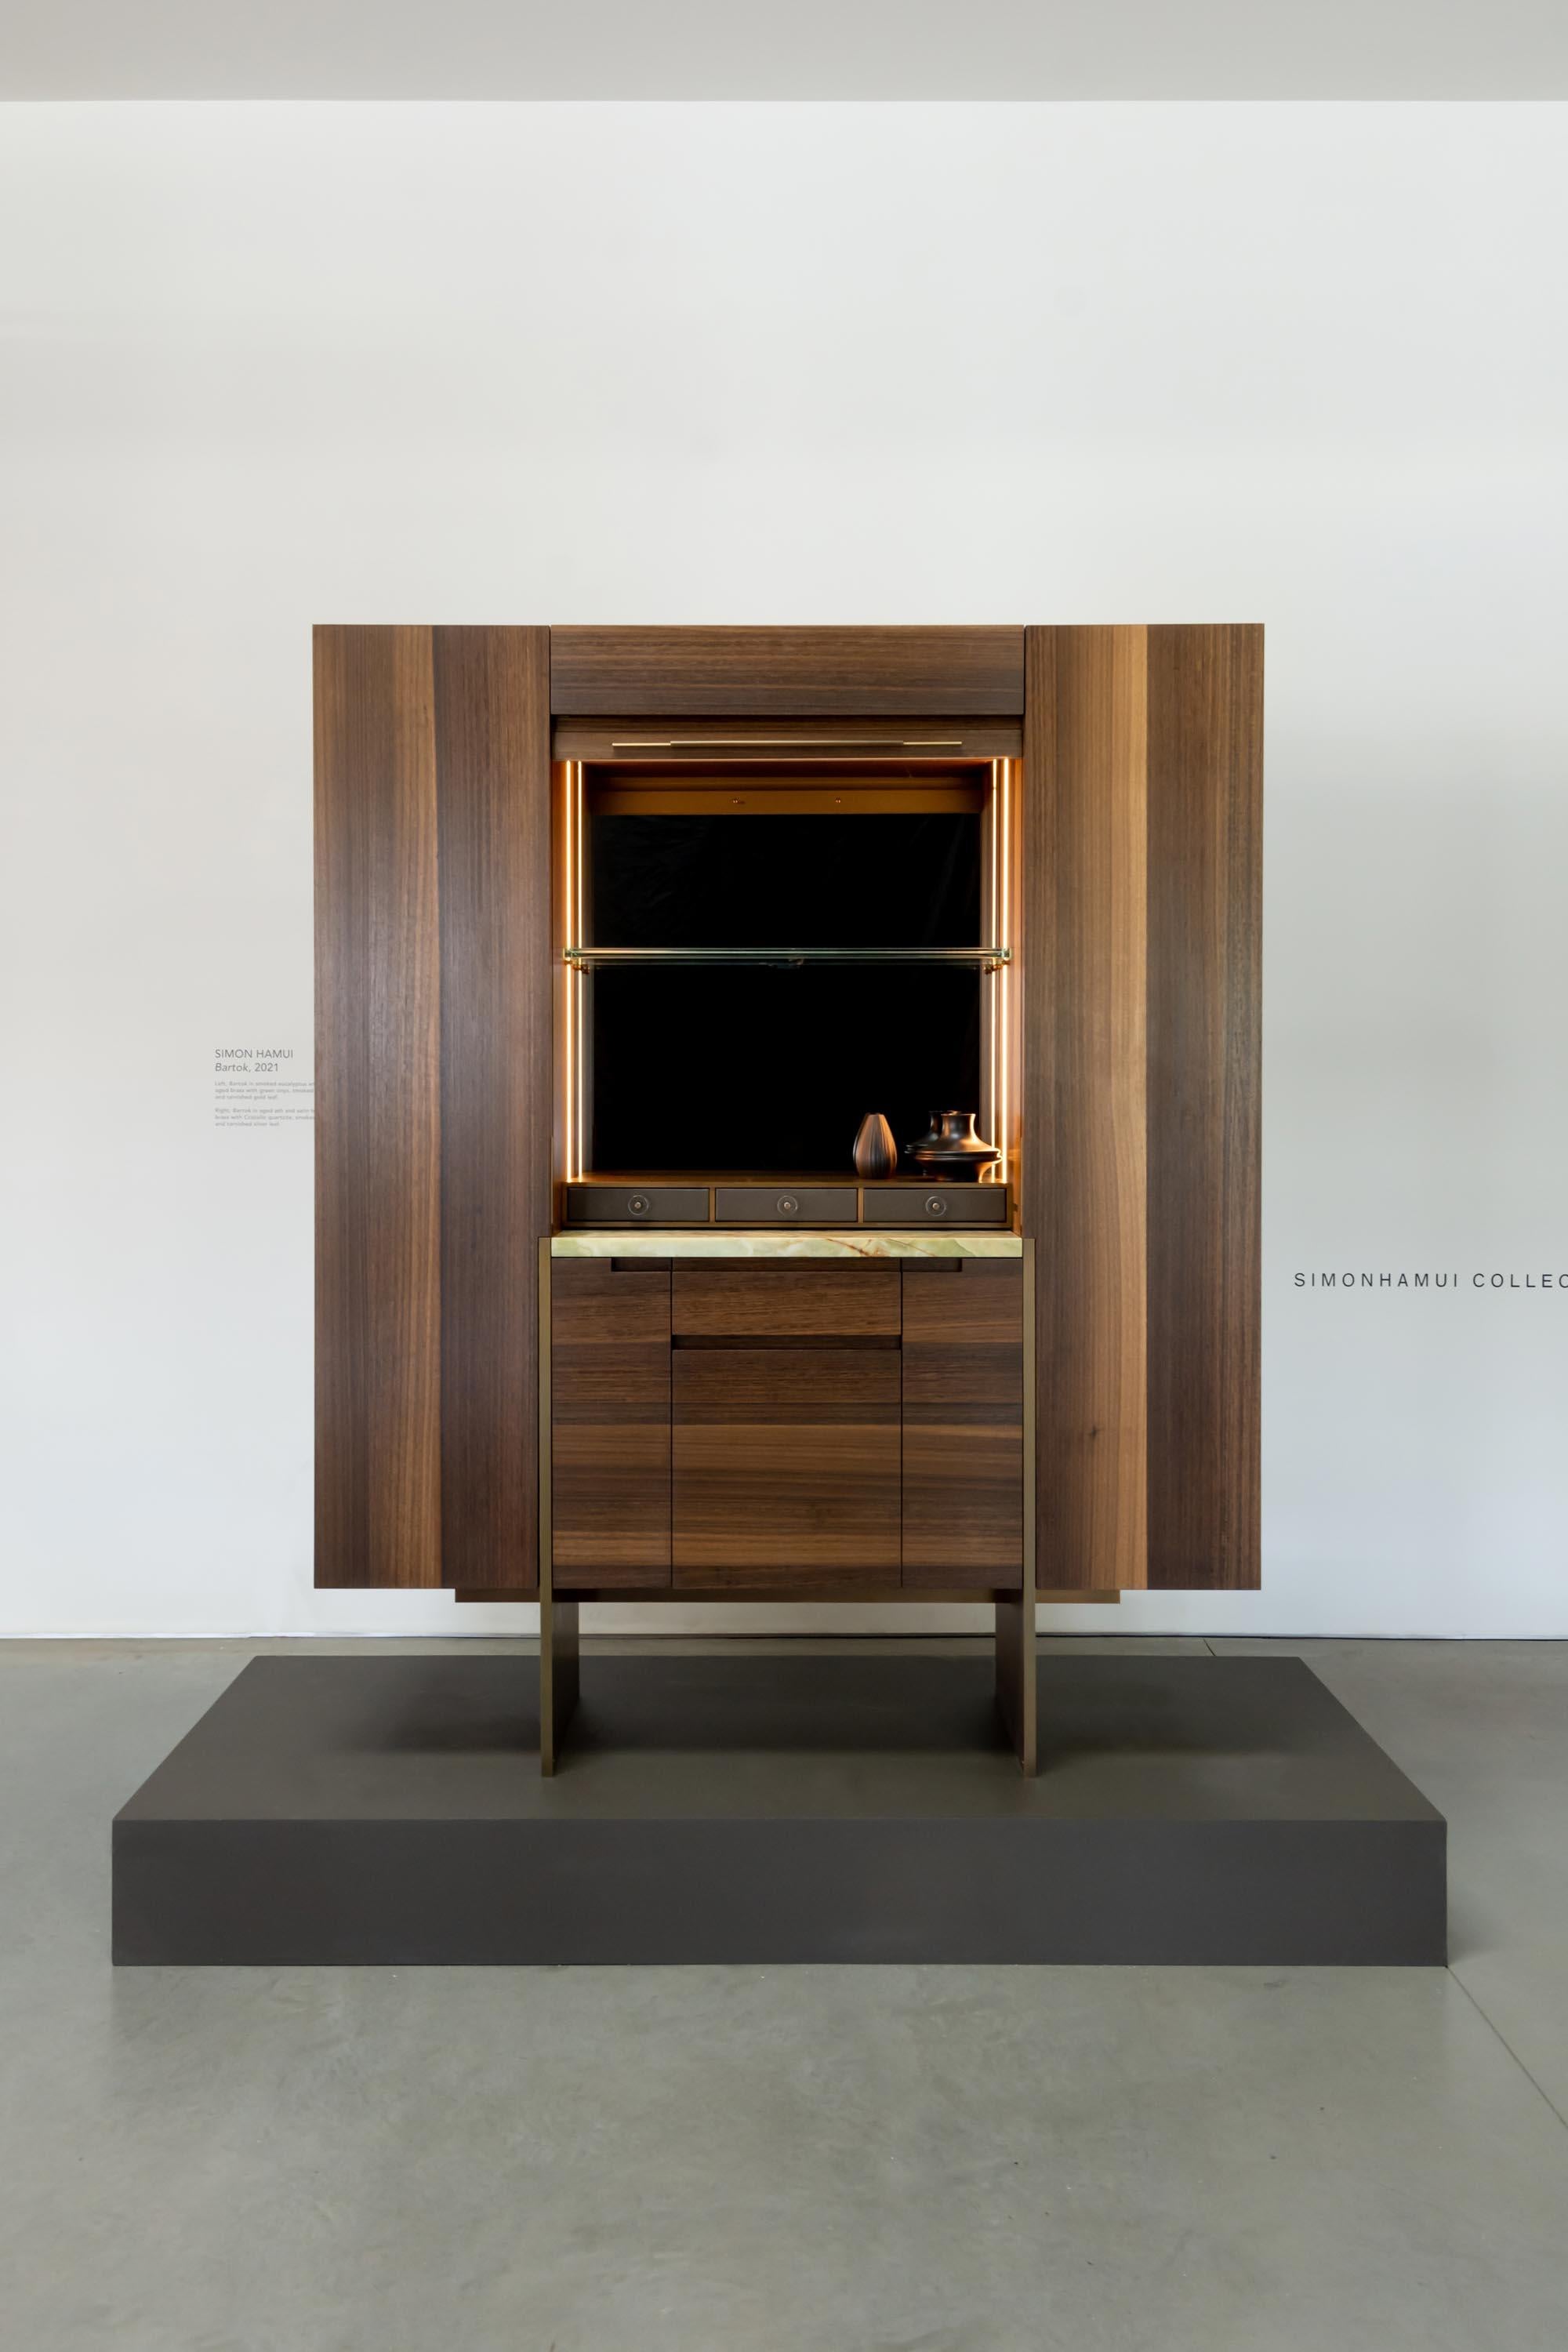 Bartok, the founding piece of Simon Hamui Collectibles, is a limited edition standalone bar cabinet launching in a series of 6, each distinguished in materials and colors. 

The first is finished in a smoked eucalyptus with a brushed and oiled